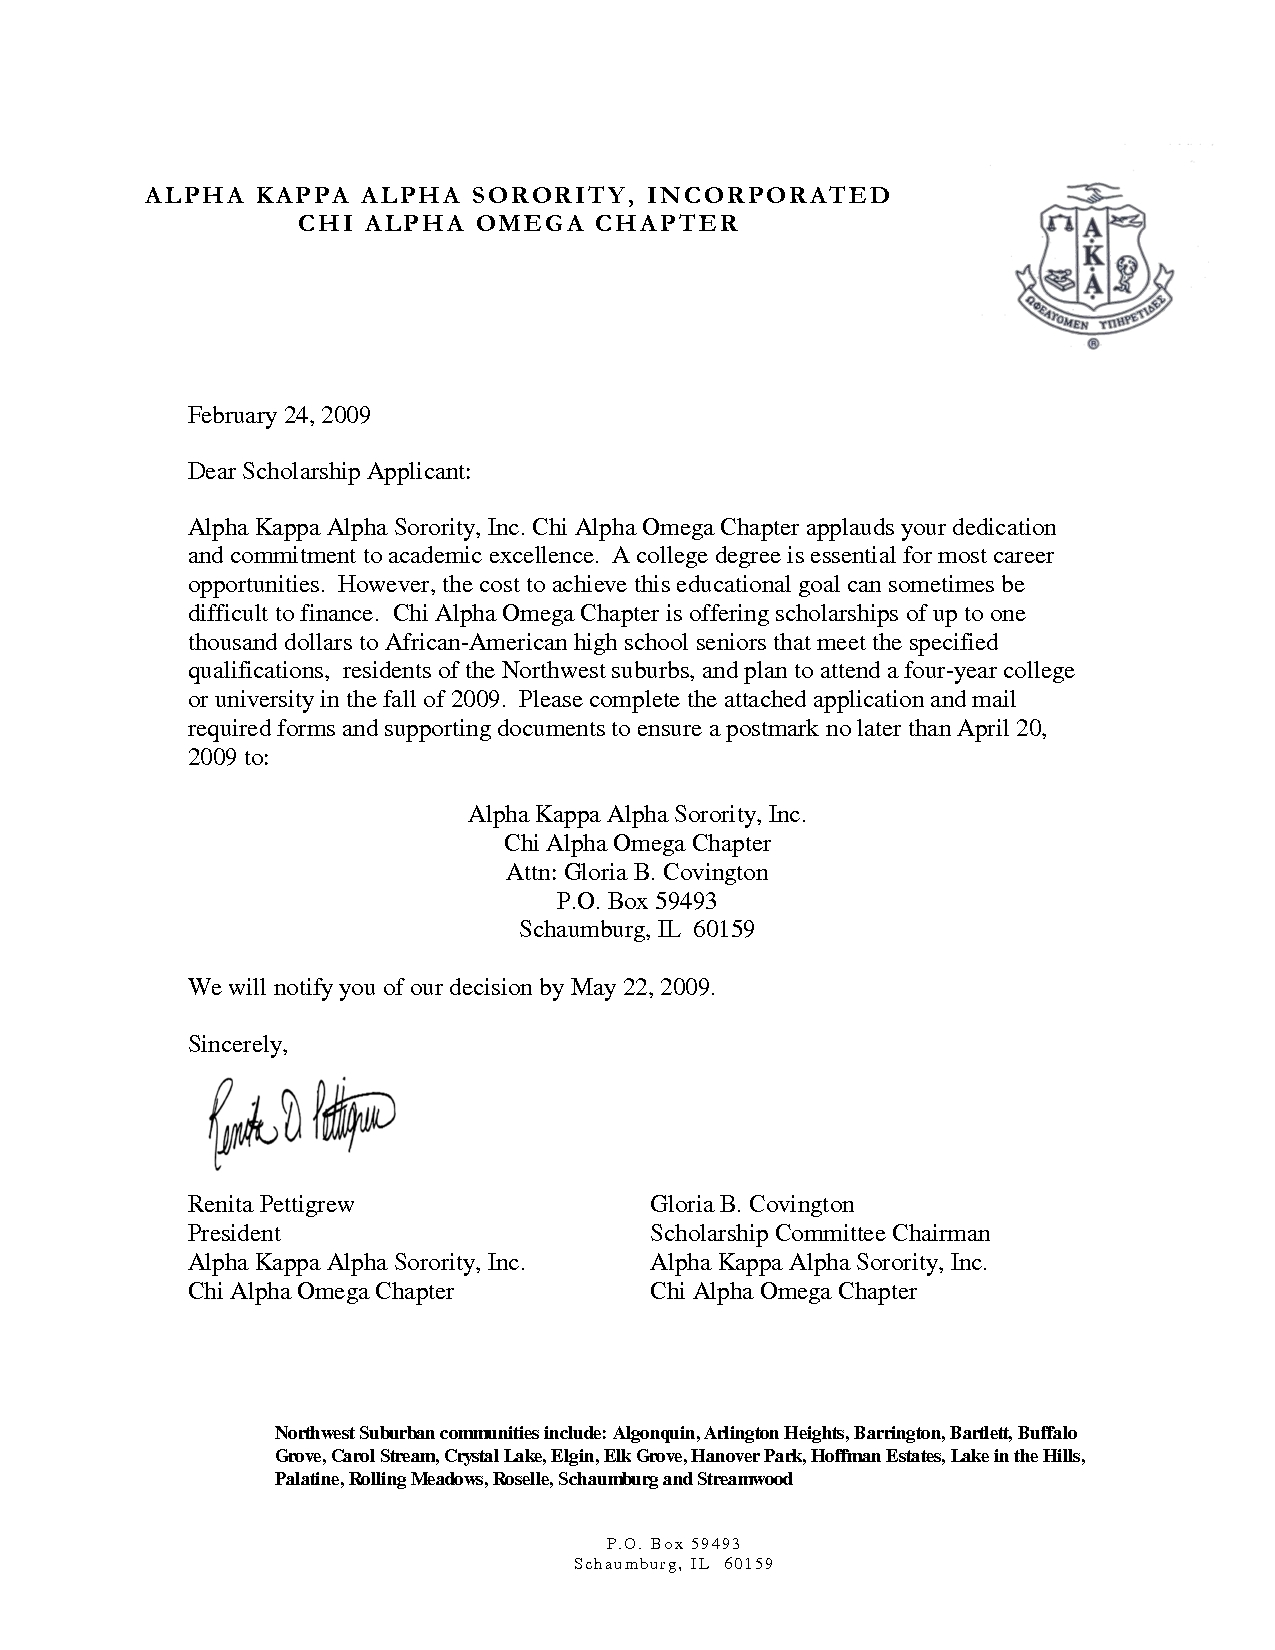 Sample Sorority Recommendation Letter Free Resume Templates inside proportions 1275 X 1650